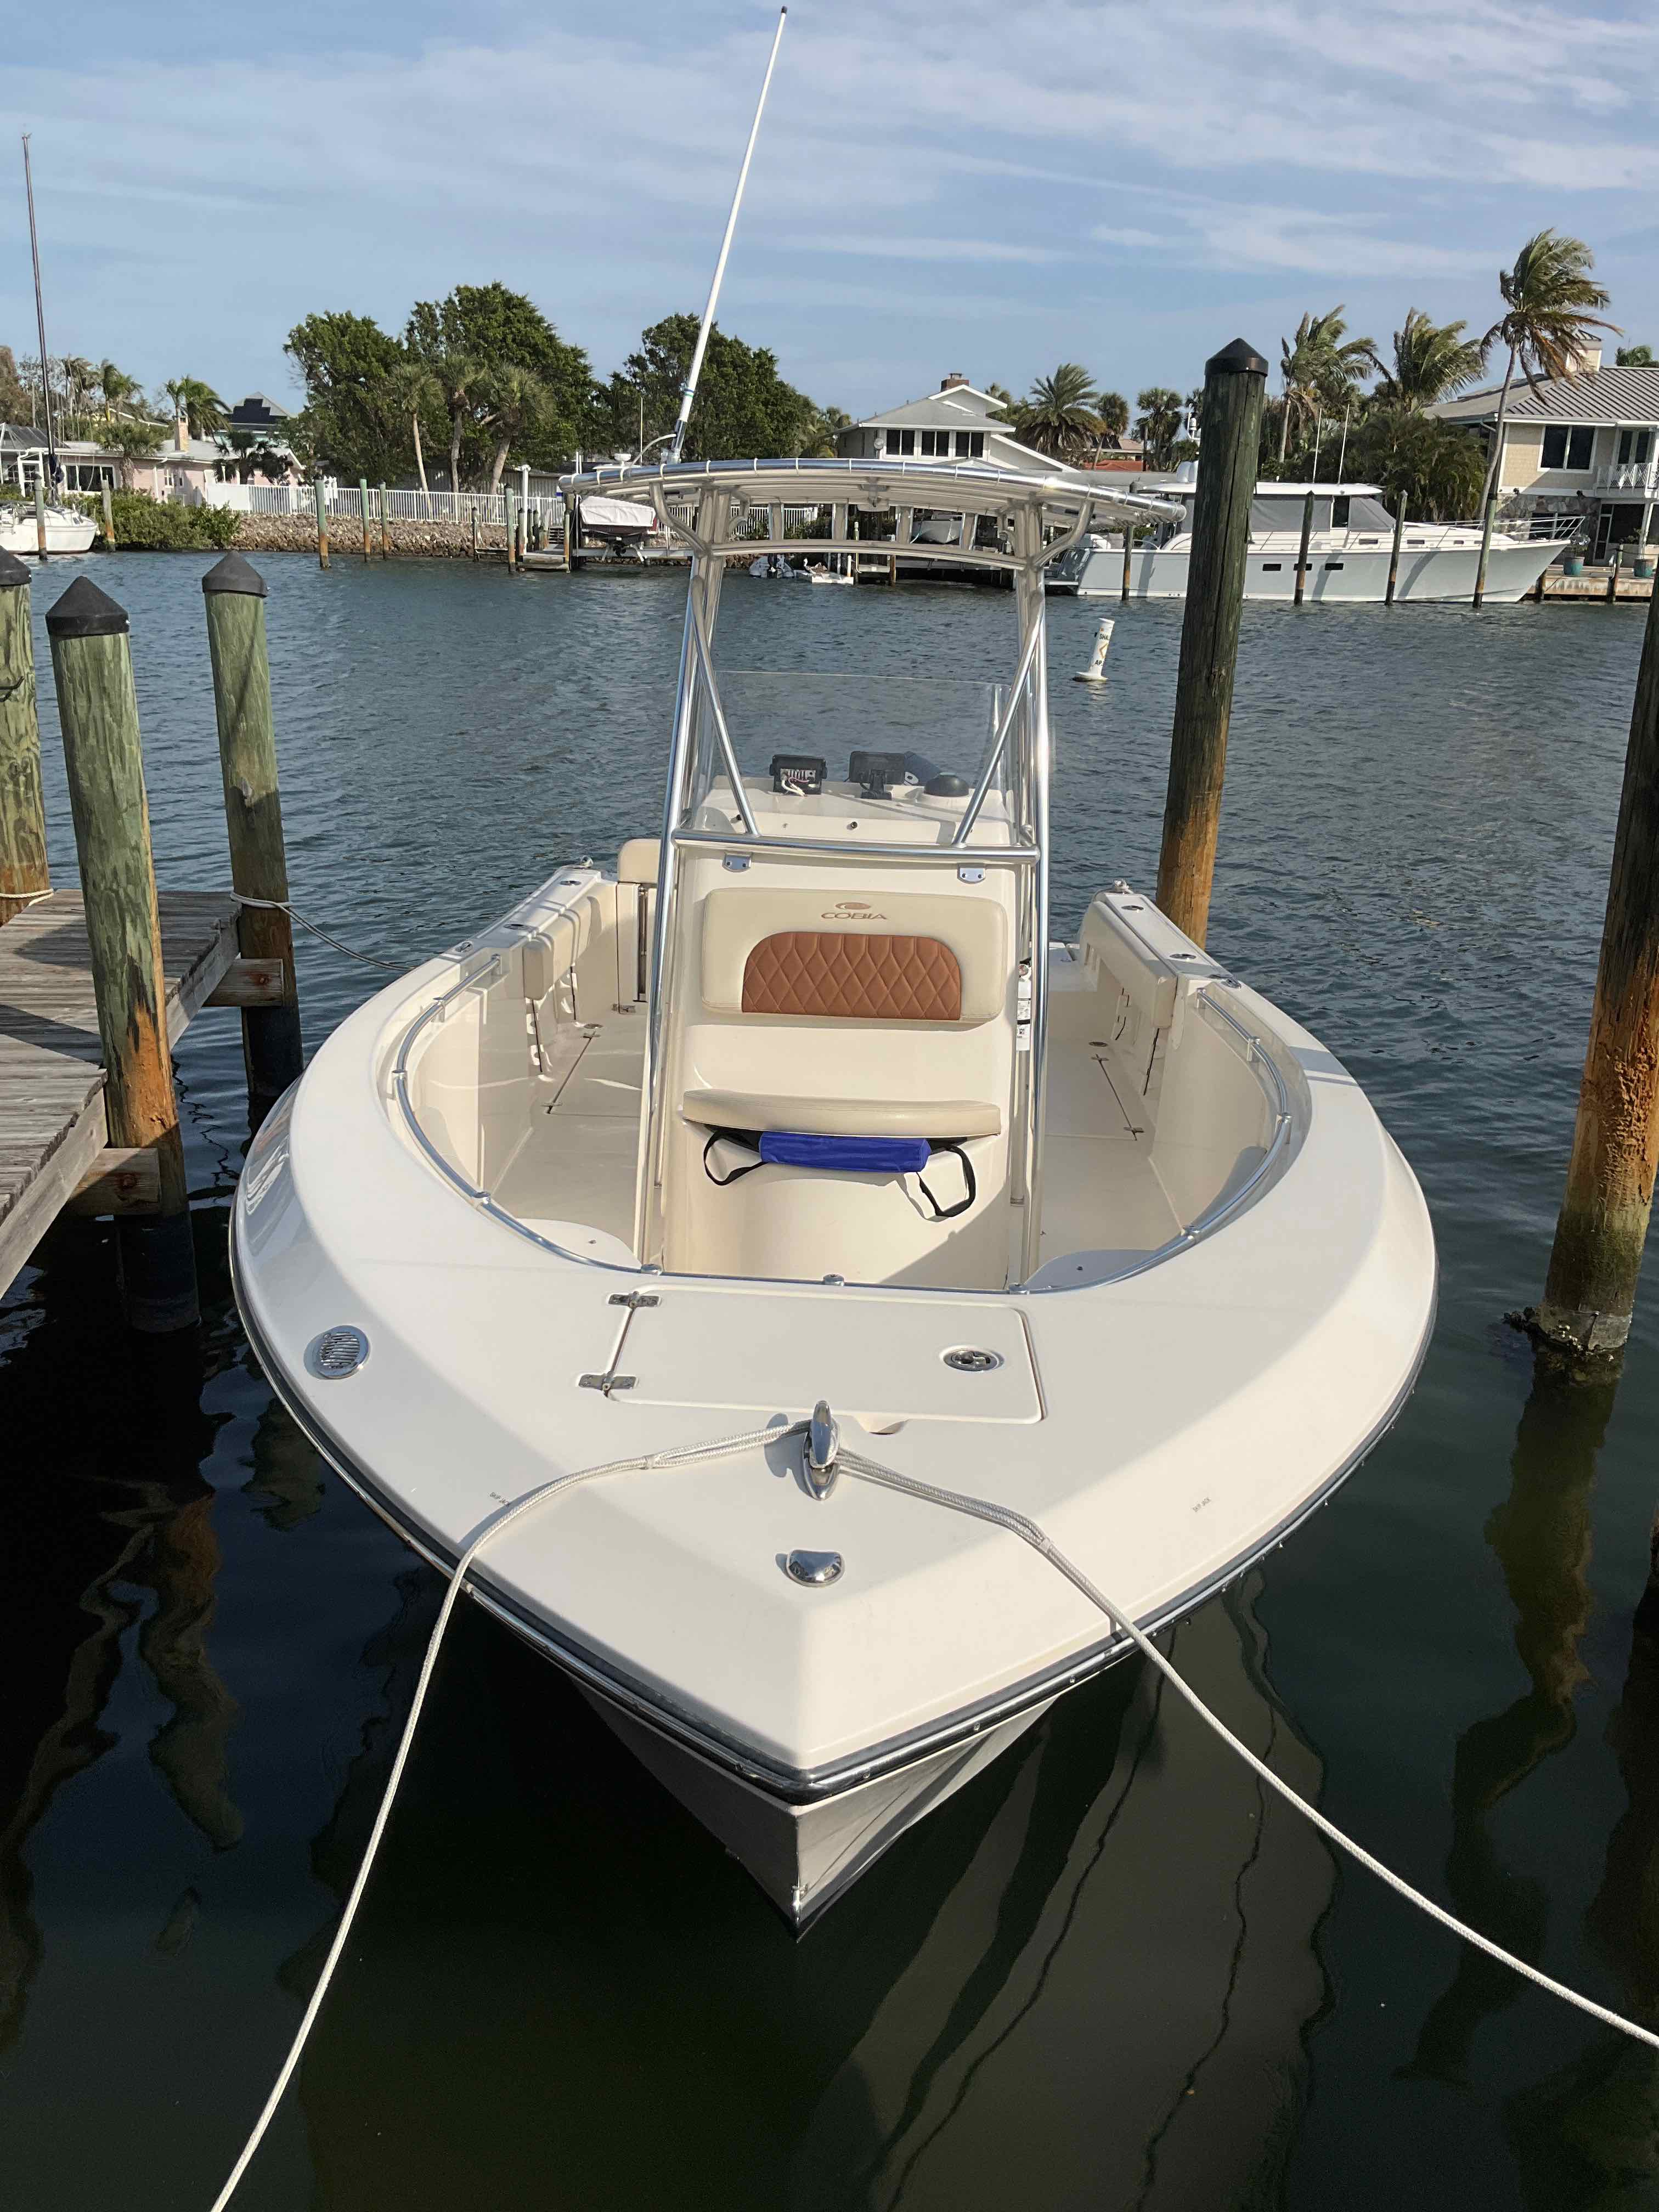 Sweet Spot (24' Offshore Center Console 250HP - fishing)